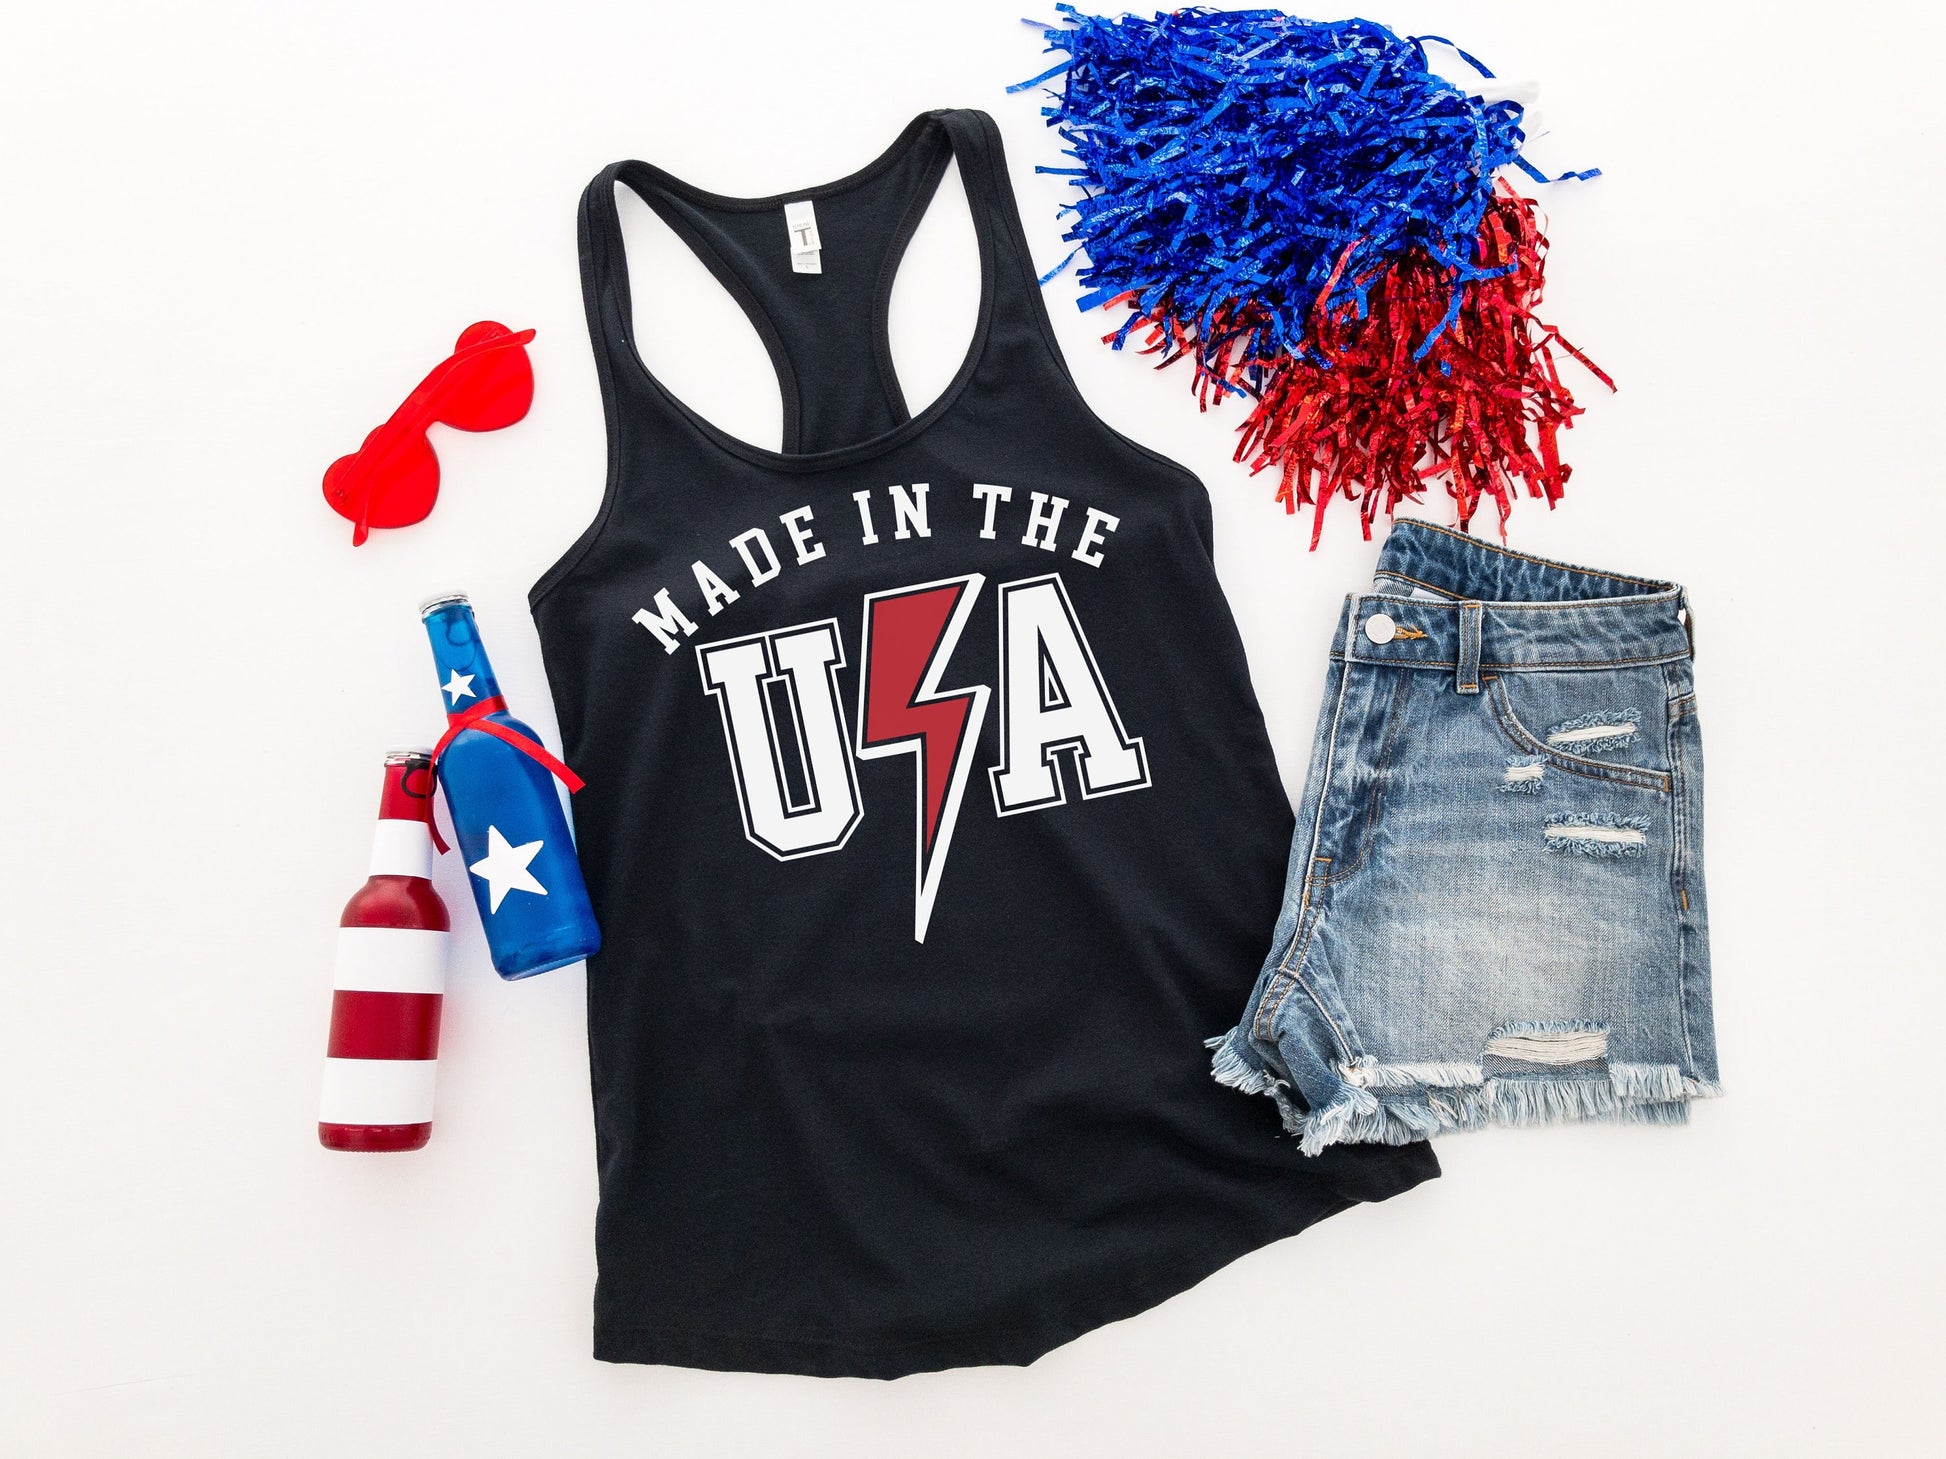 Made in the USA patriotic racerback tank • Women's 4th of July tank top